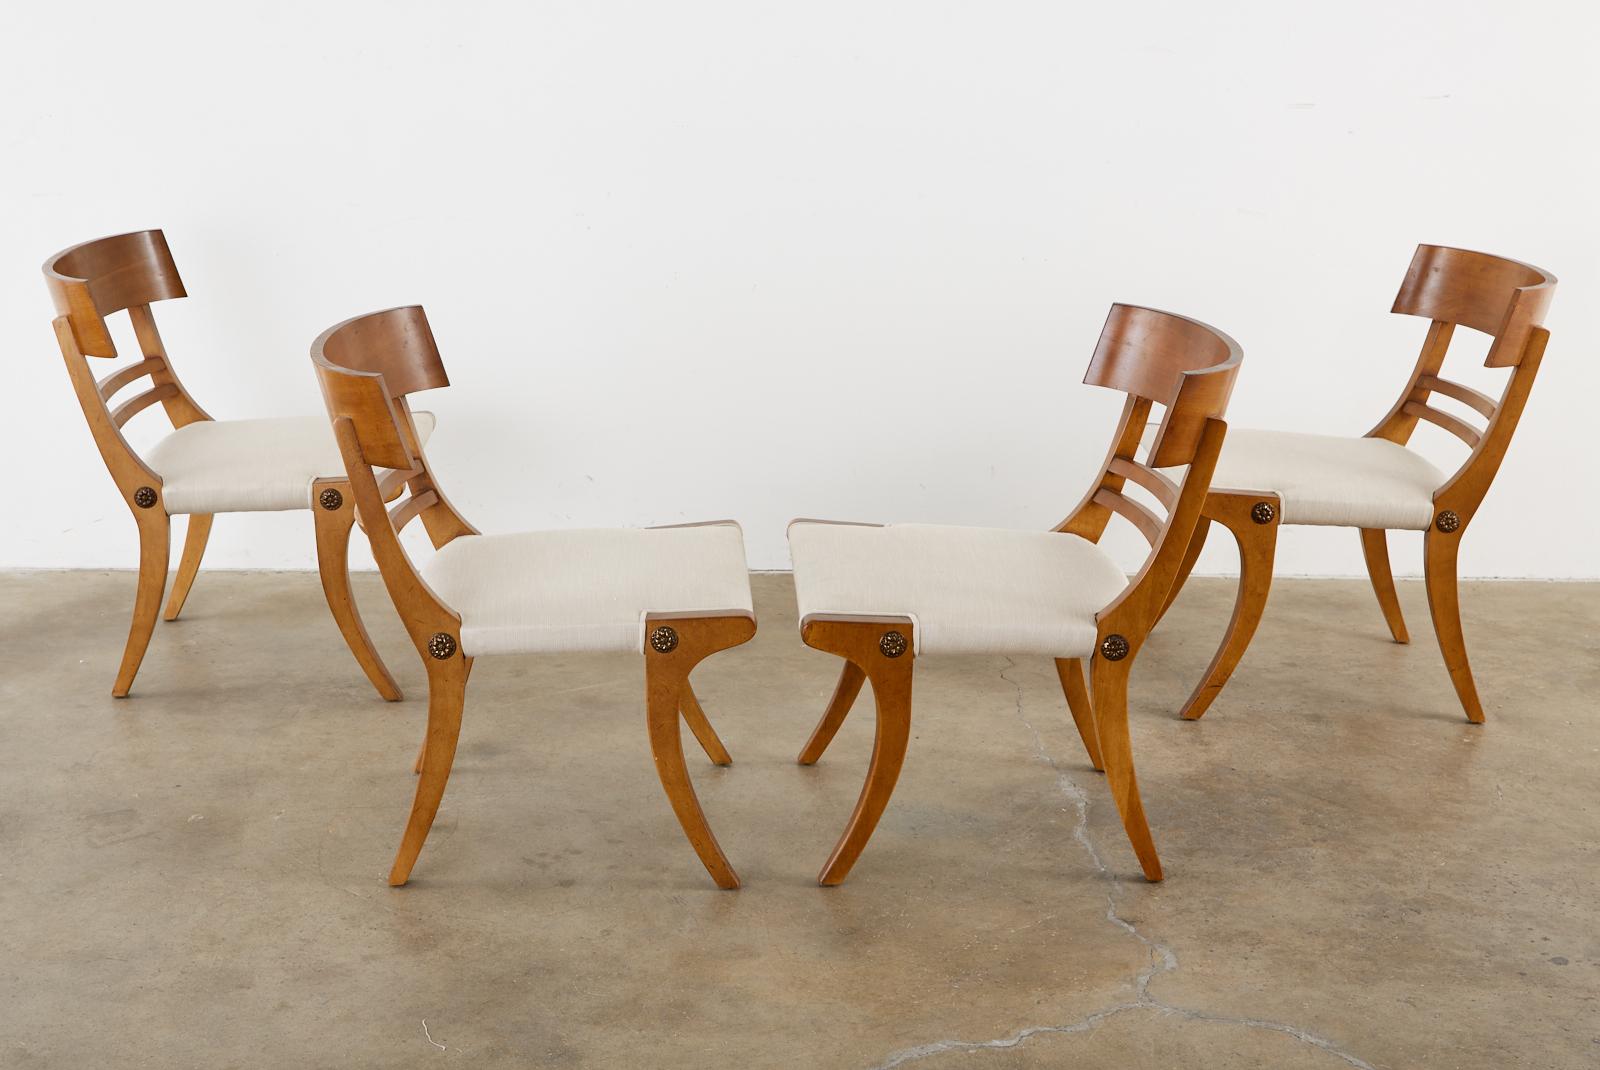 Stylish set of four Mid-Century Modern klismos chairs made in the neoclassical Greco-Roman taste. The chairs have a dramatic profile with a wide curved tablet back support. The seat is supported by distinctive saber legs having a decorative bronze